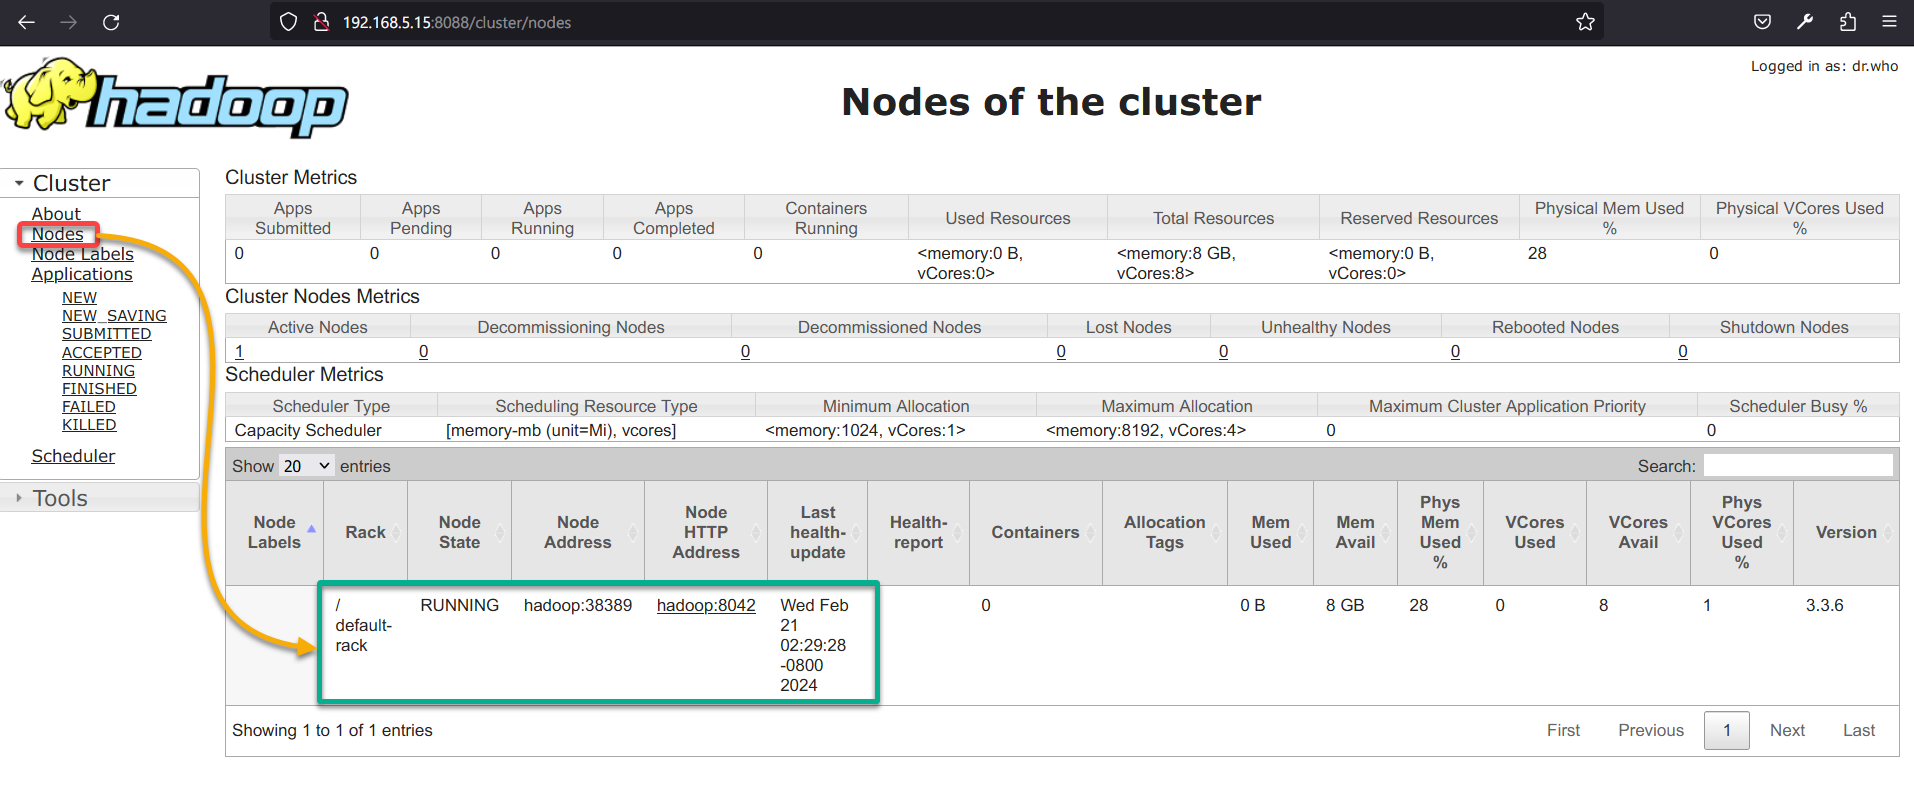 Listing available Nodes in the Hadoop cluster